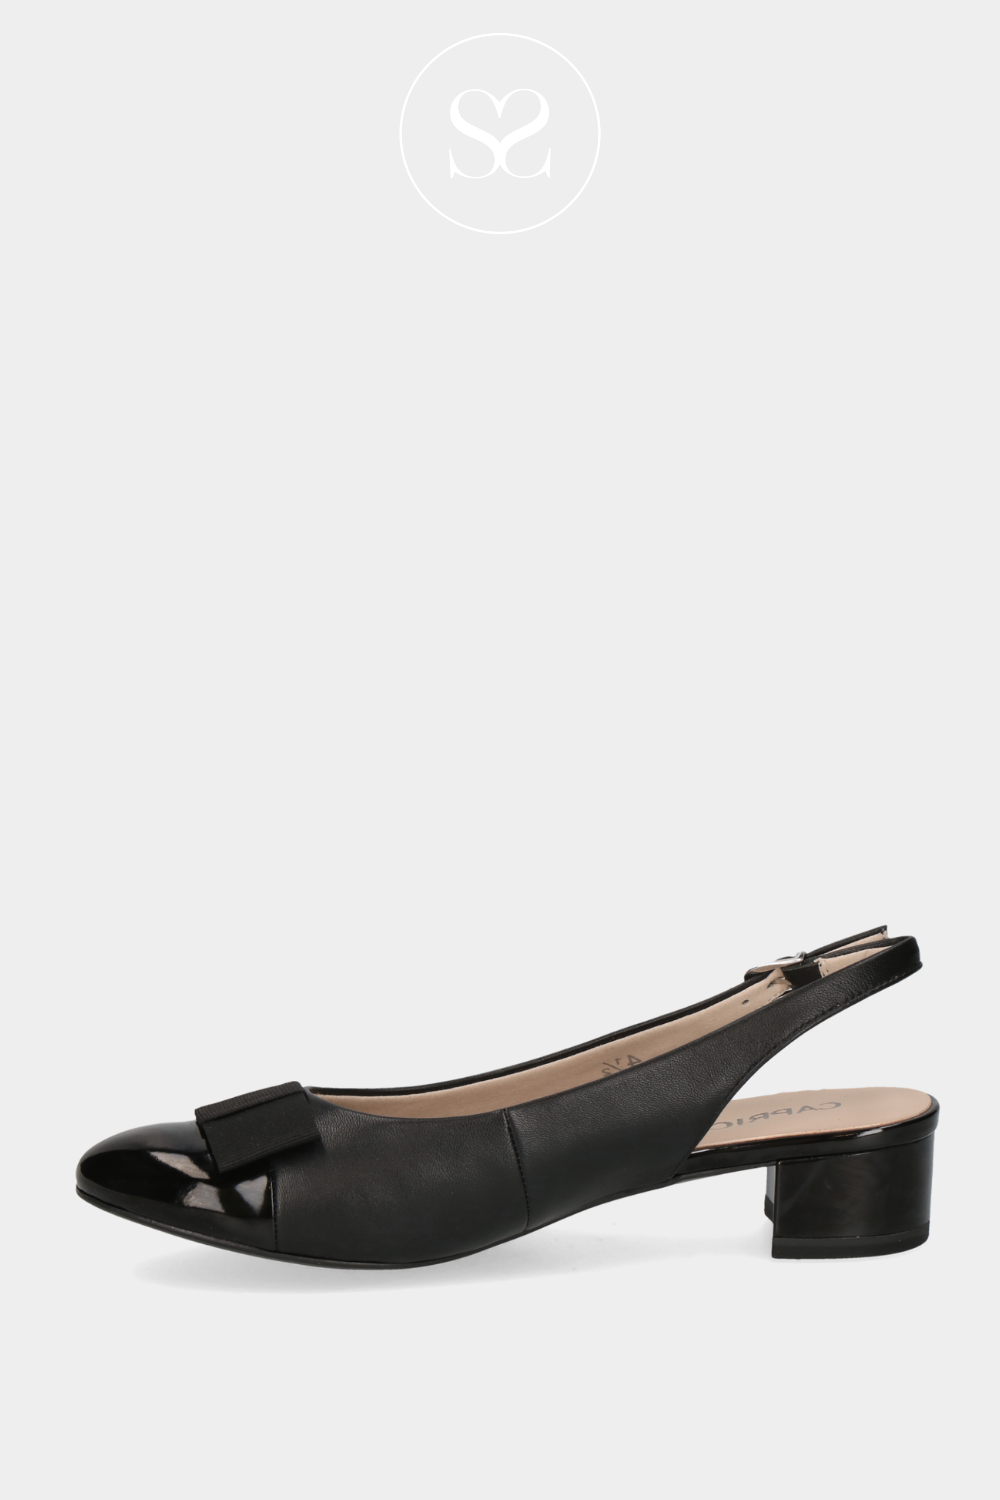 CAPRICE 9-29502-42 BLACK HEELED PUMP WITH ADJUSTABLE SLINGBACK STRAP AND BLACK BOW TO THE FRONT